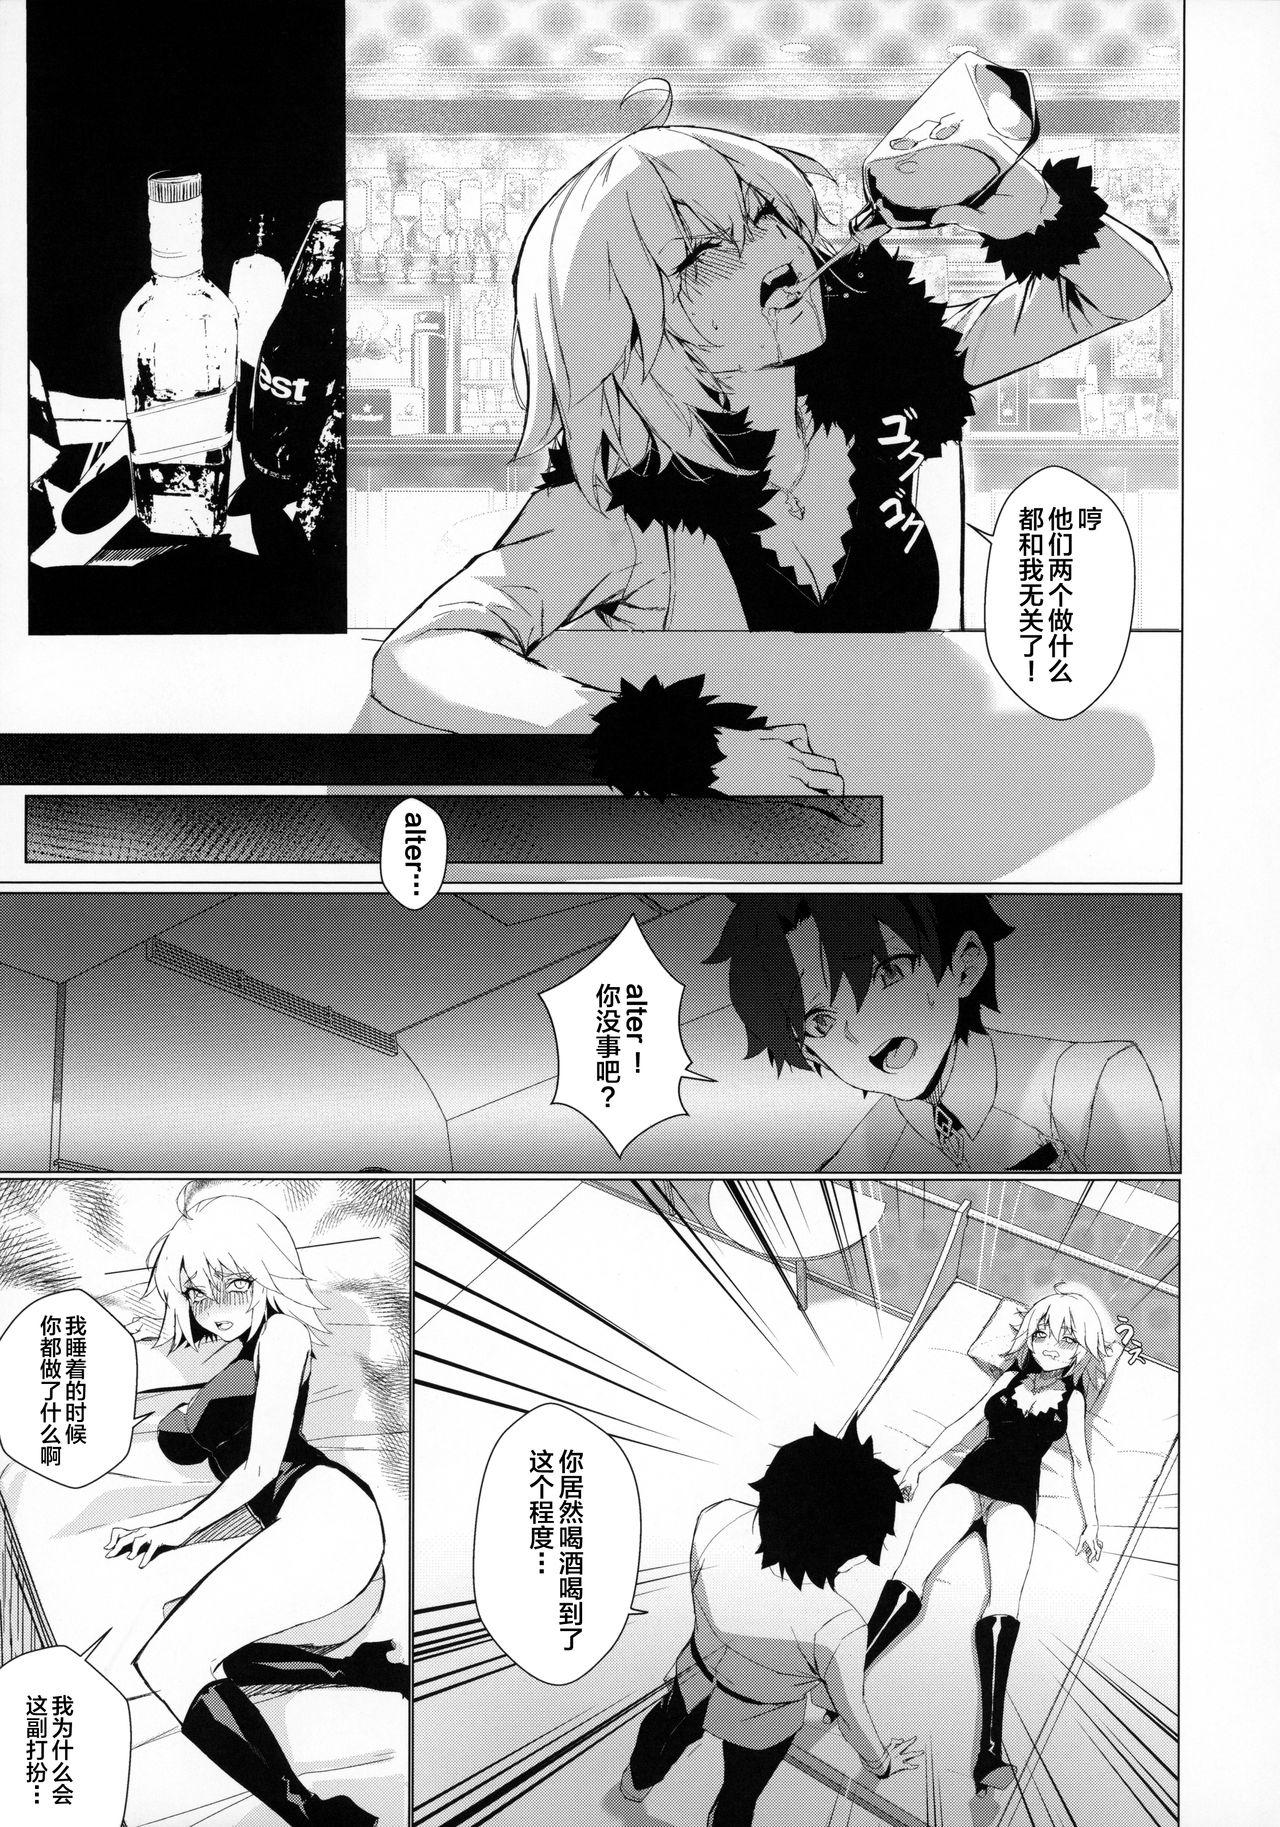 Buttfucking PERROS - Fate grand order Titty Fuck - Page 4